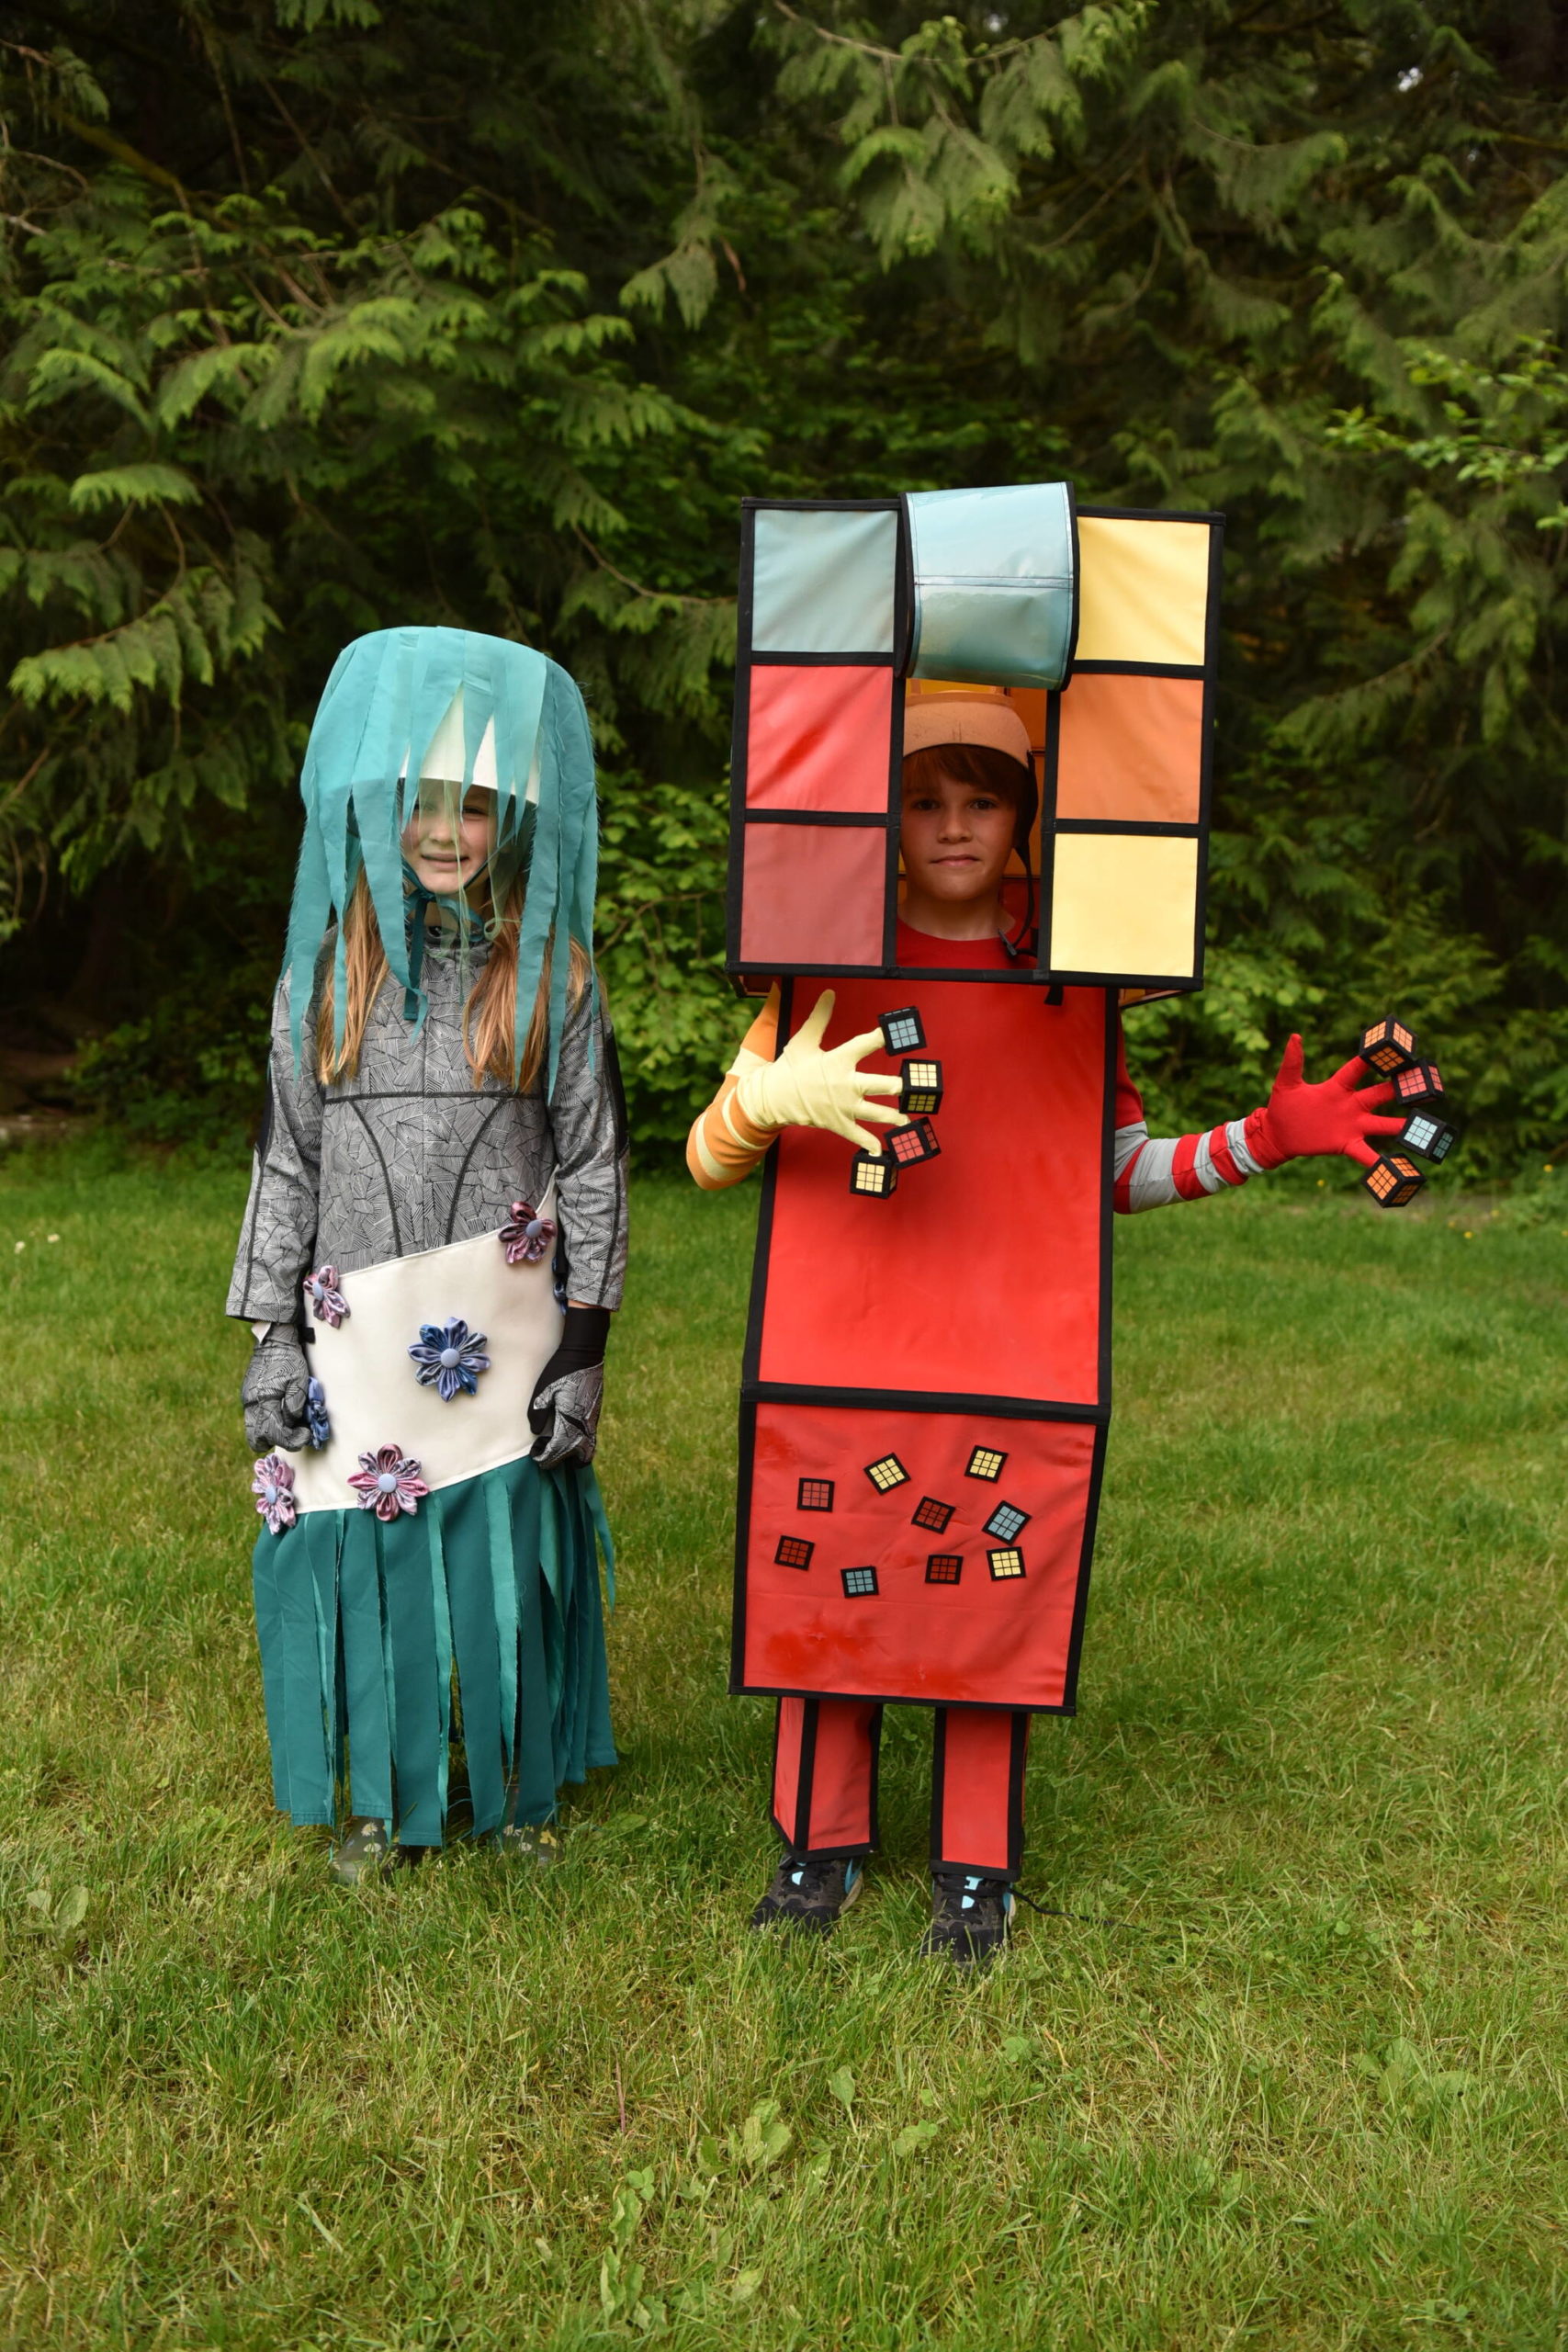 Fiona Livingston modeled a Sound suit designed by Dawn Snider, and Finn McDowell modeled one designed by Lynn Christiansen.